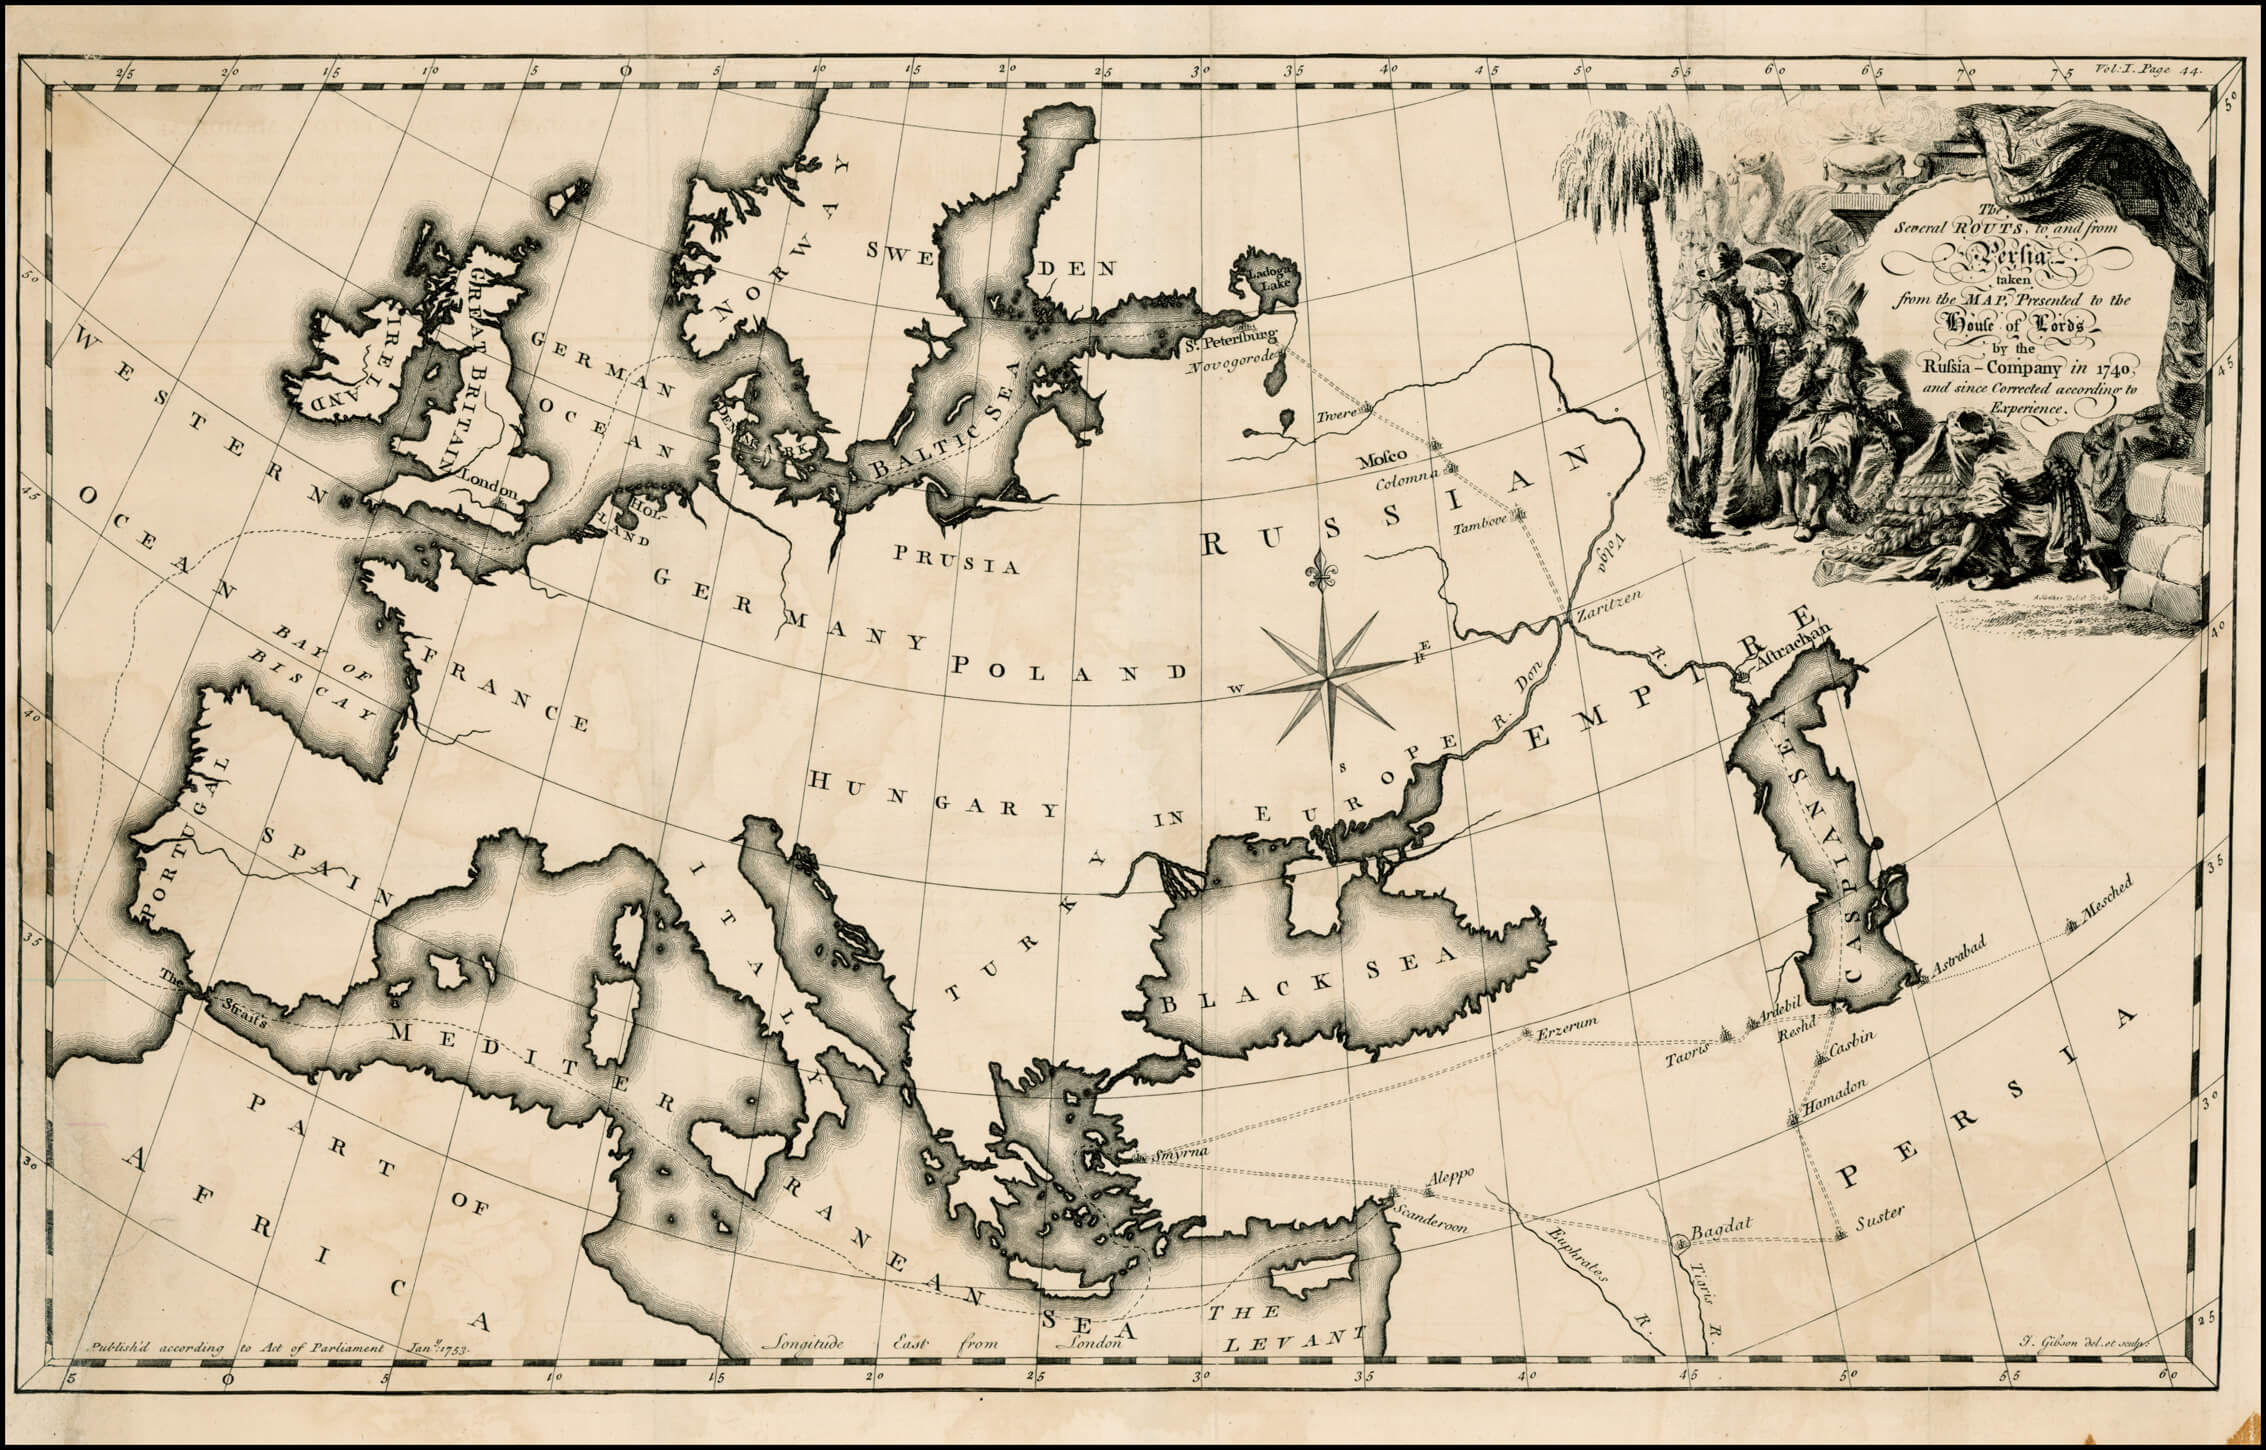 Rare Historical Maps for Collectors